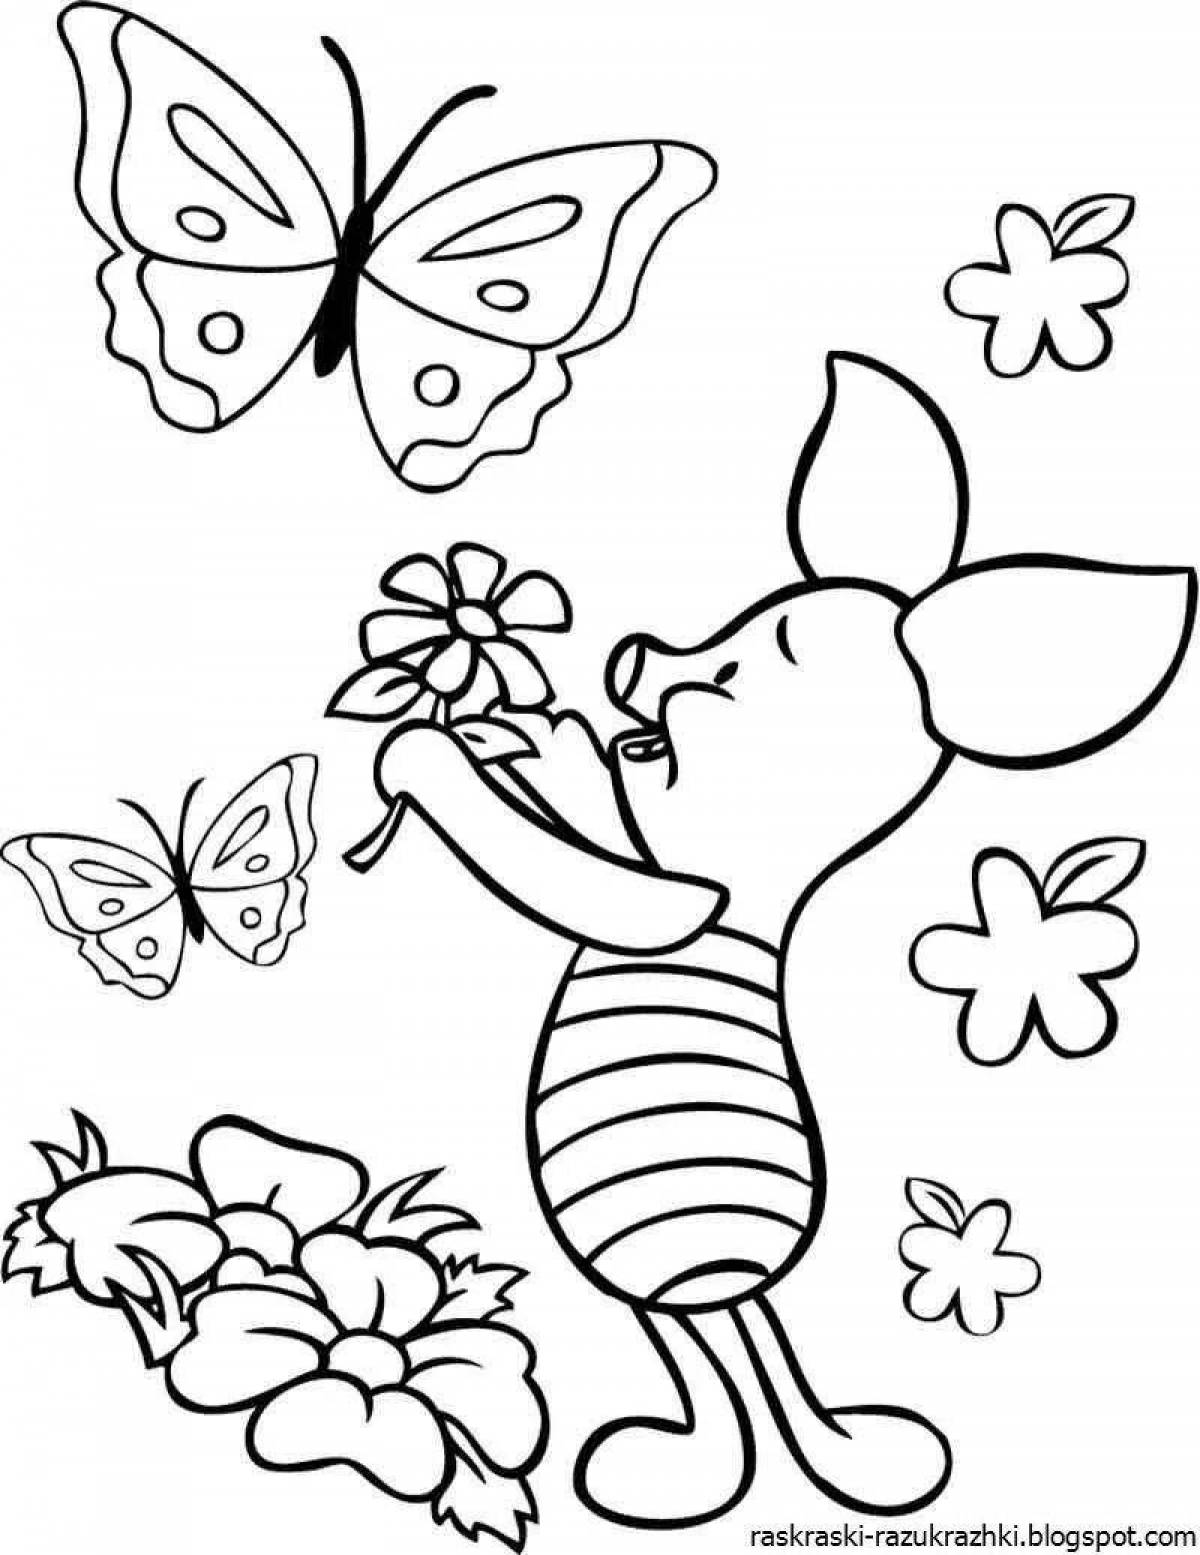 Charming flowers and butterflies coloring book